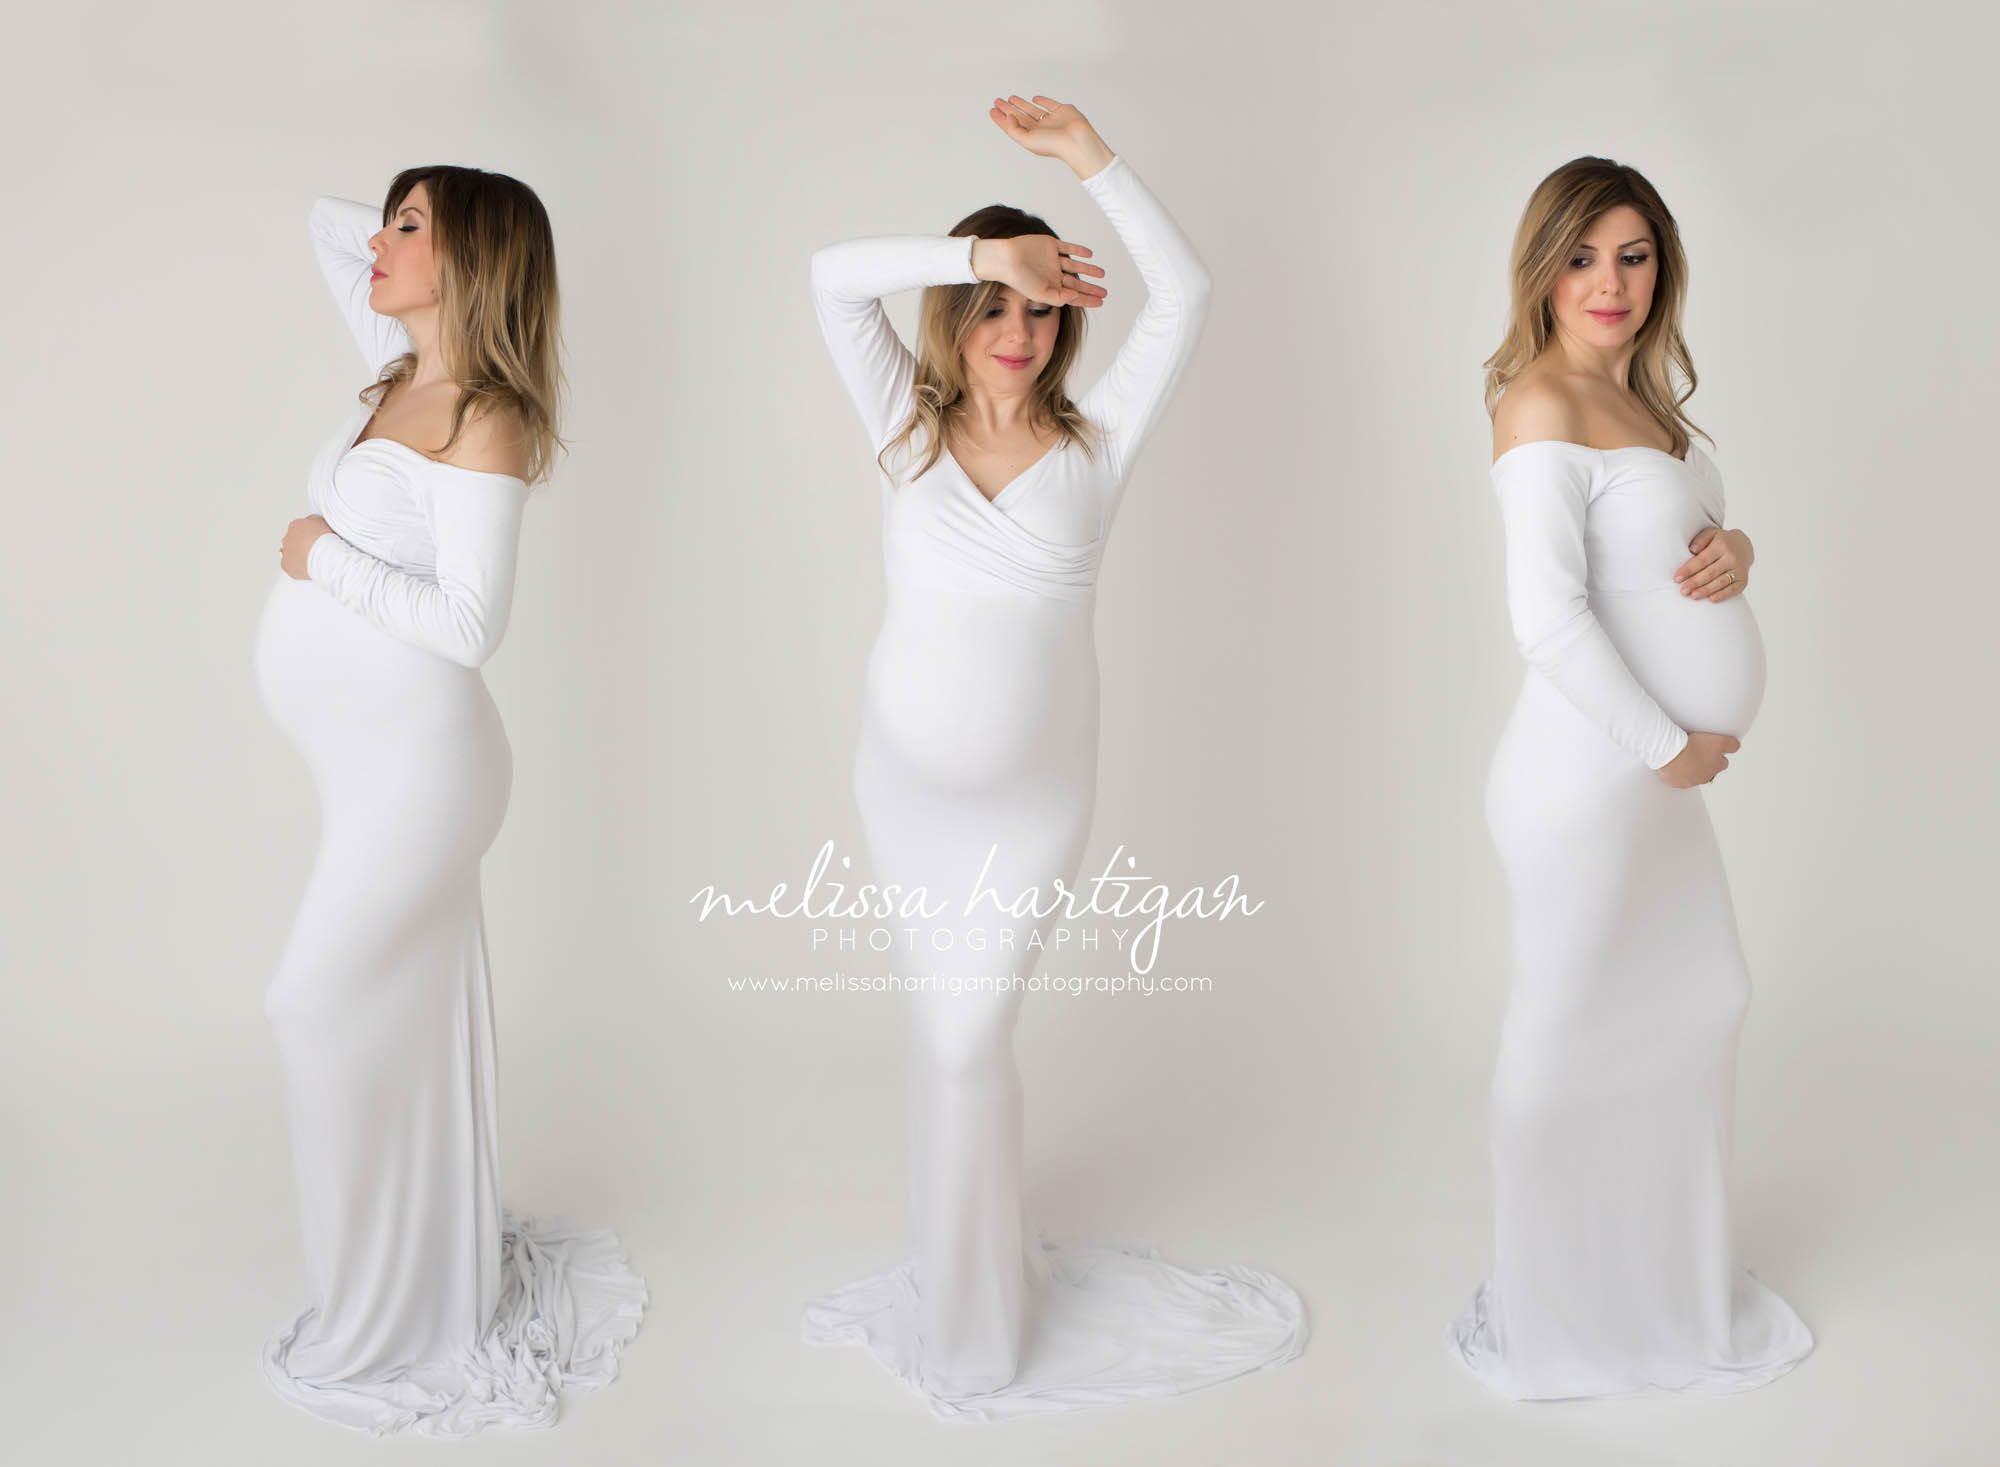 Melissa Hartigan Photography Connecticut Best Maternity Photographer in CT Coventry Ct Middlefield CT baby Fairfield county Newborn and maternity CT photographer Maternity photographer Mommy-to-be indoor session wearing white maternity dress standing in three poses